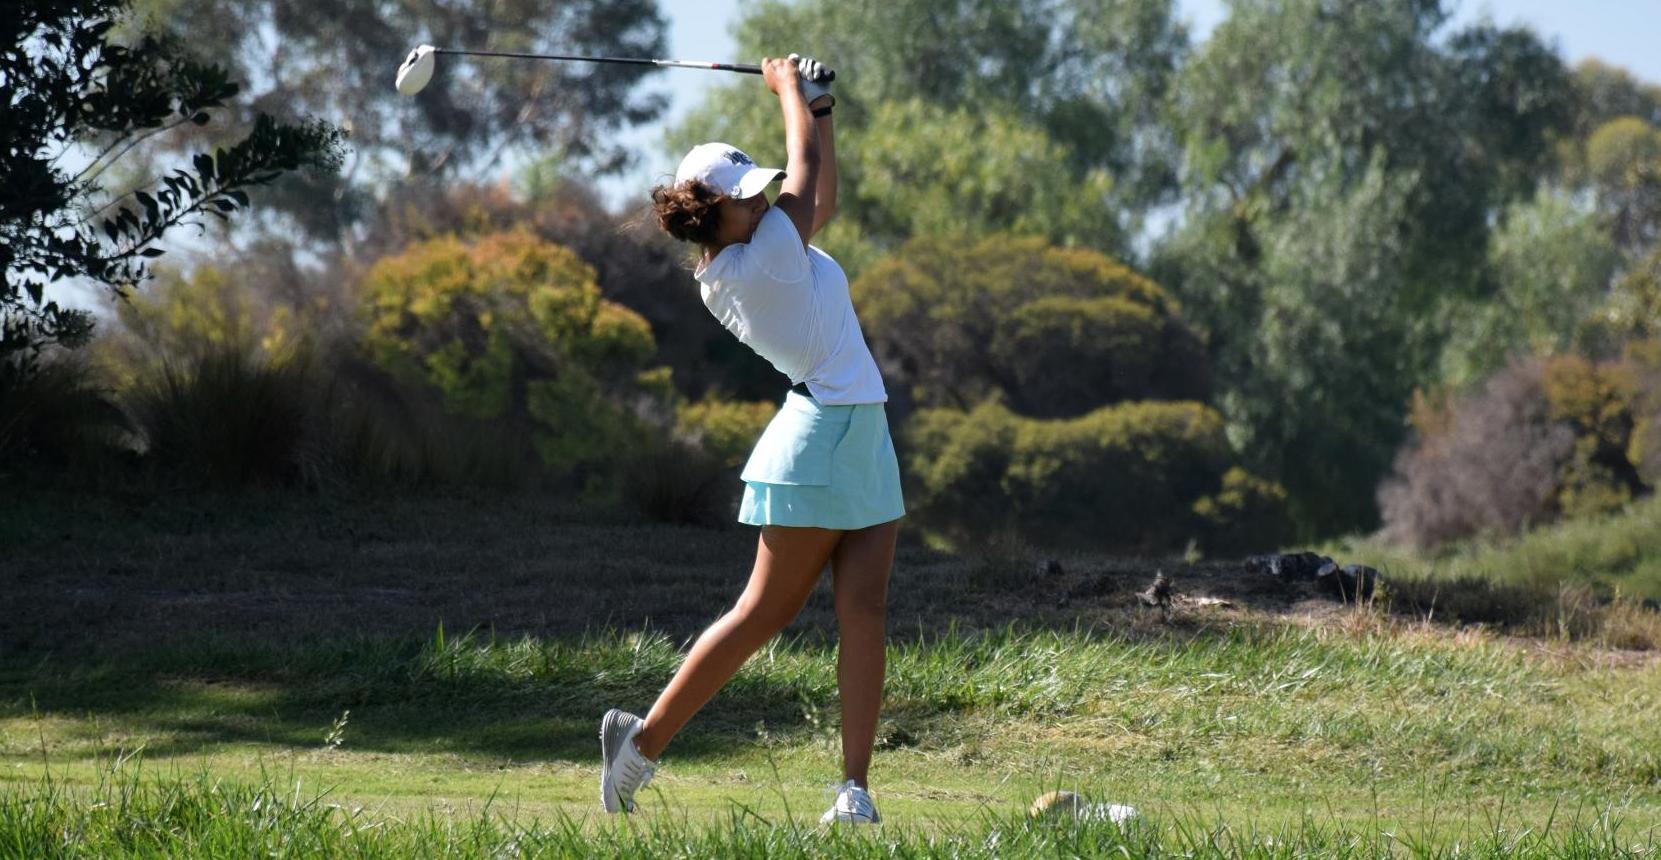 Esquivel shines again for women's golf team in match at Oak Creek